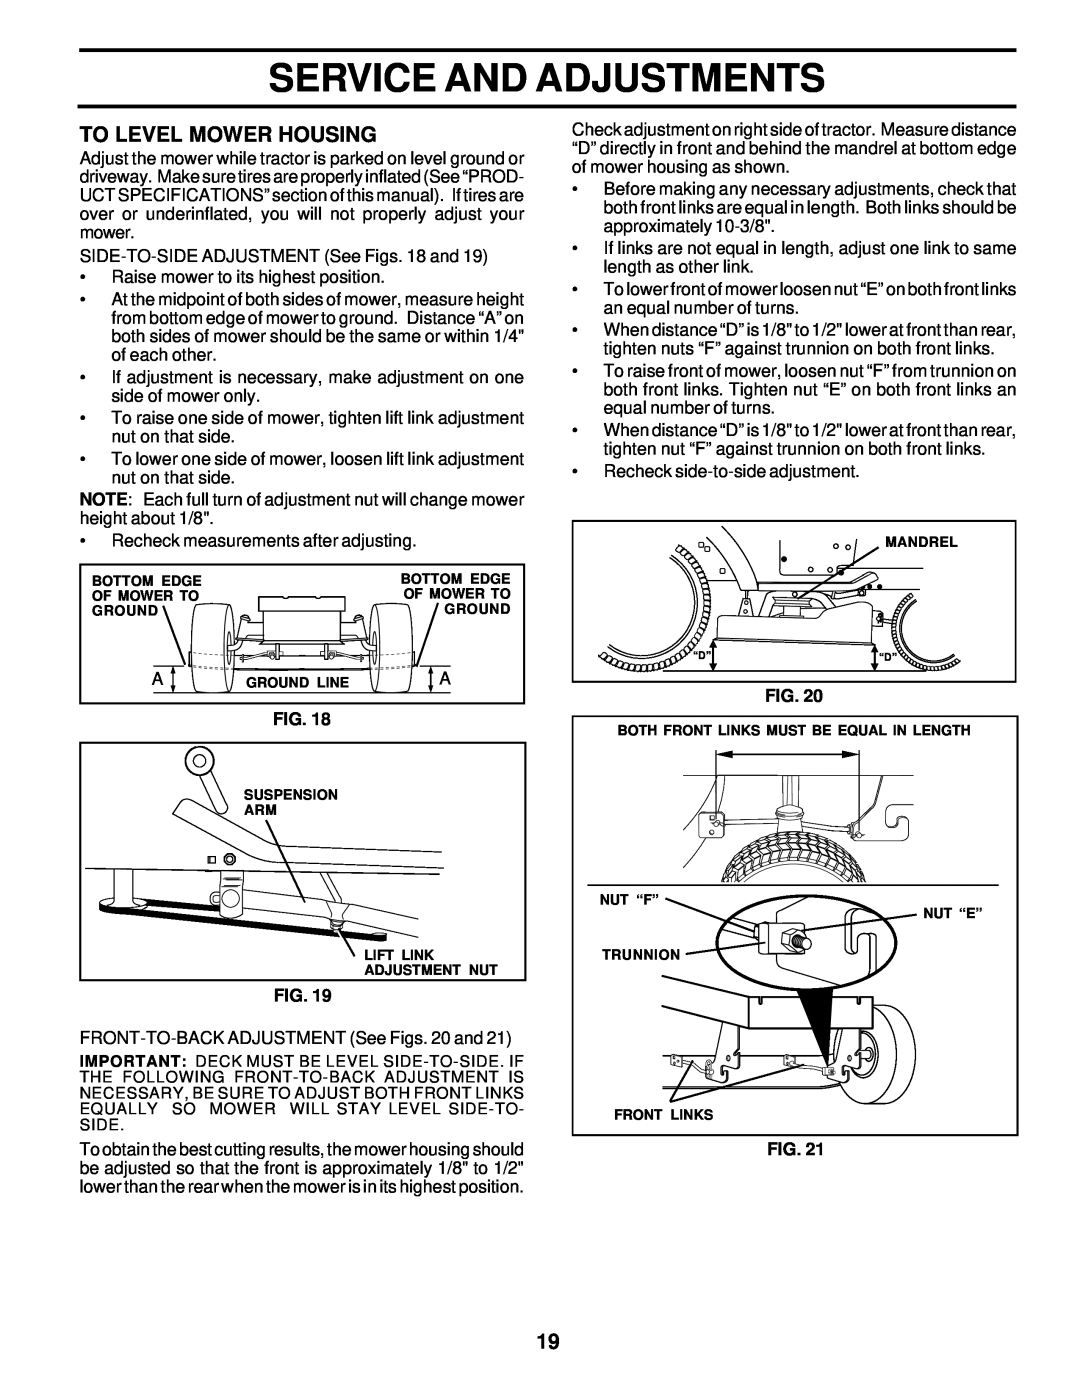 Poulan 178108 owner manual To Level Mower Housing, Service And Adjustments 